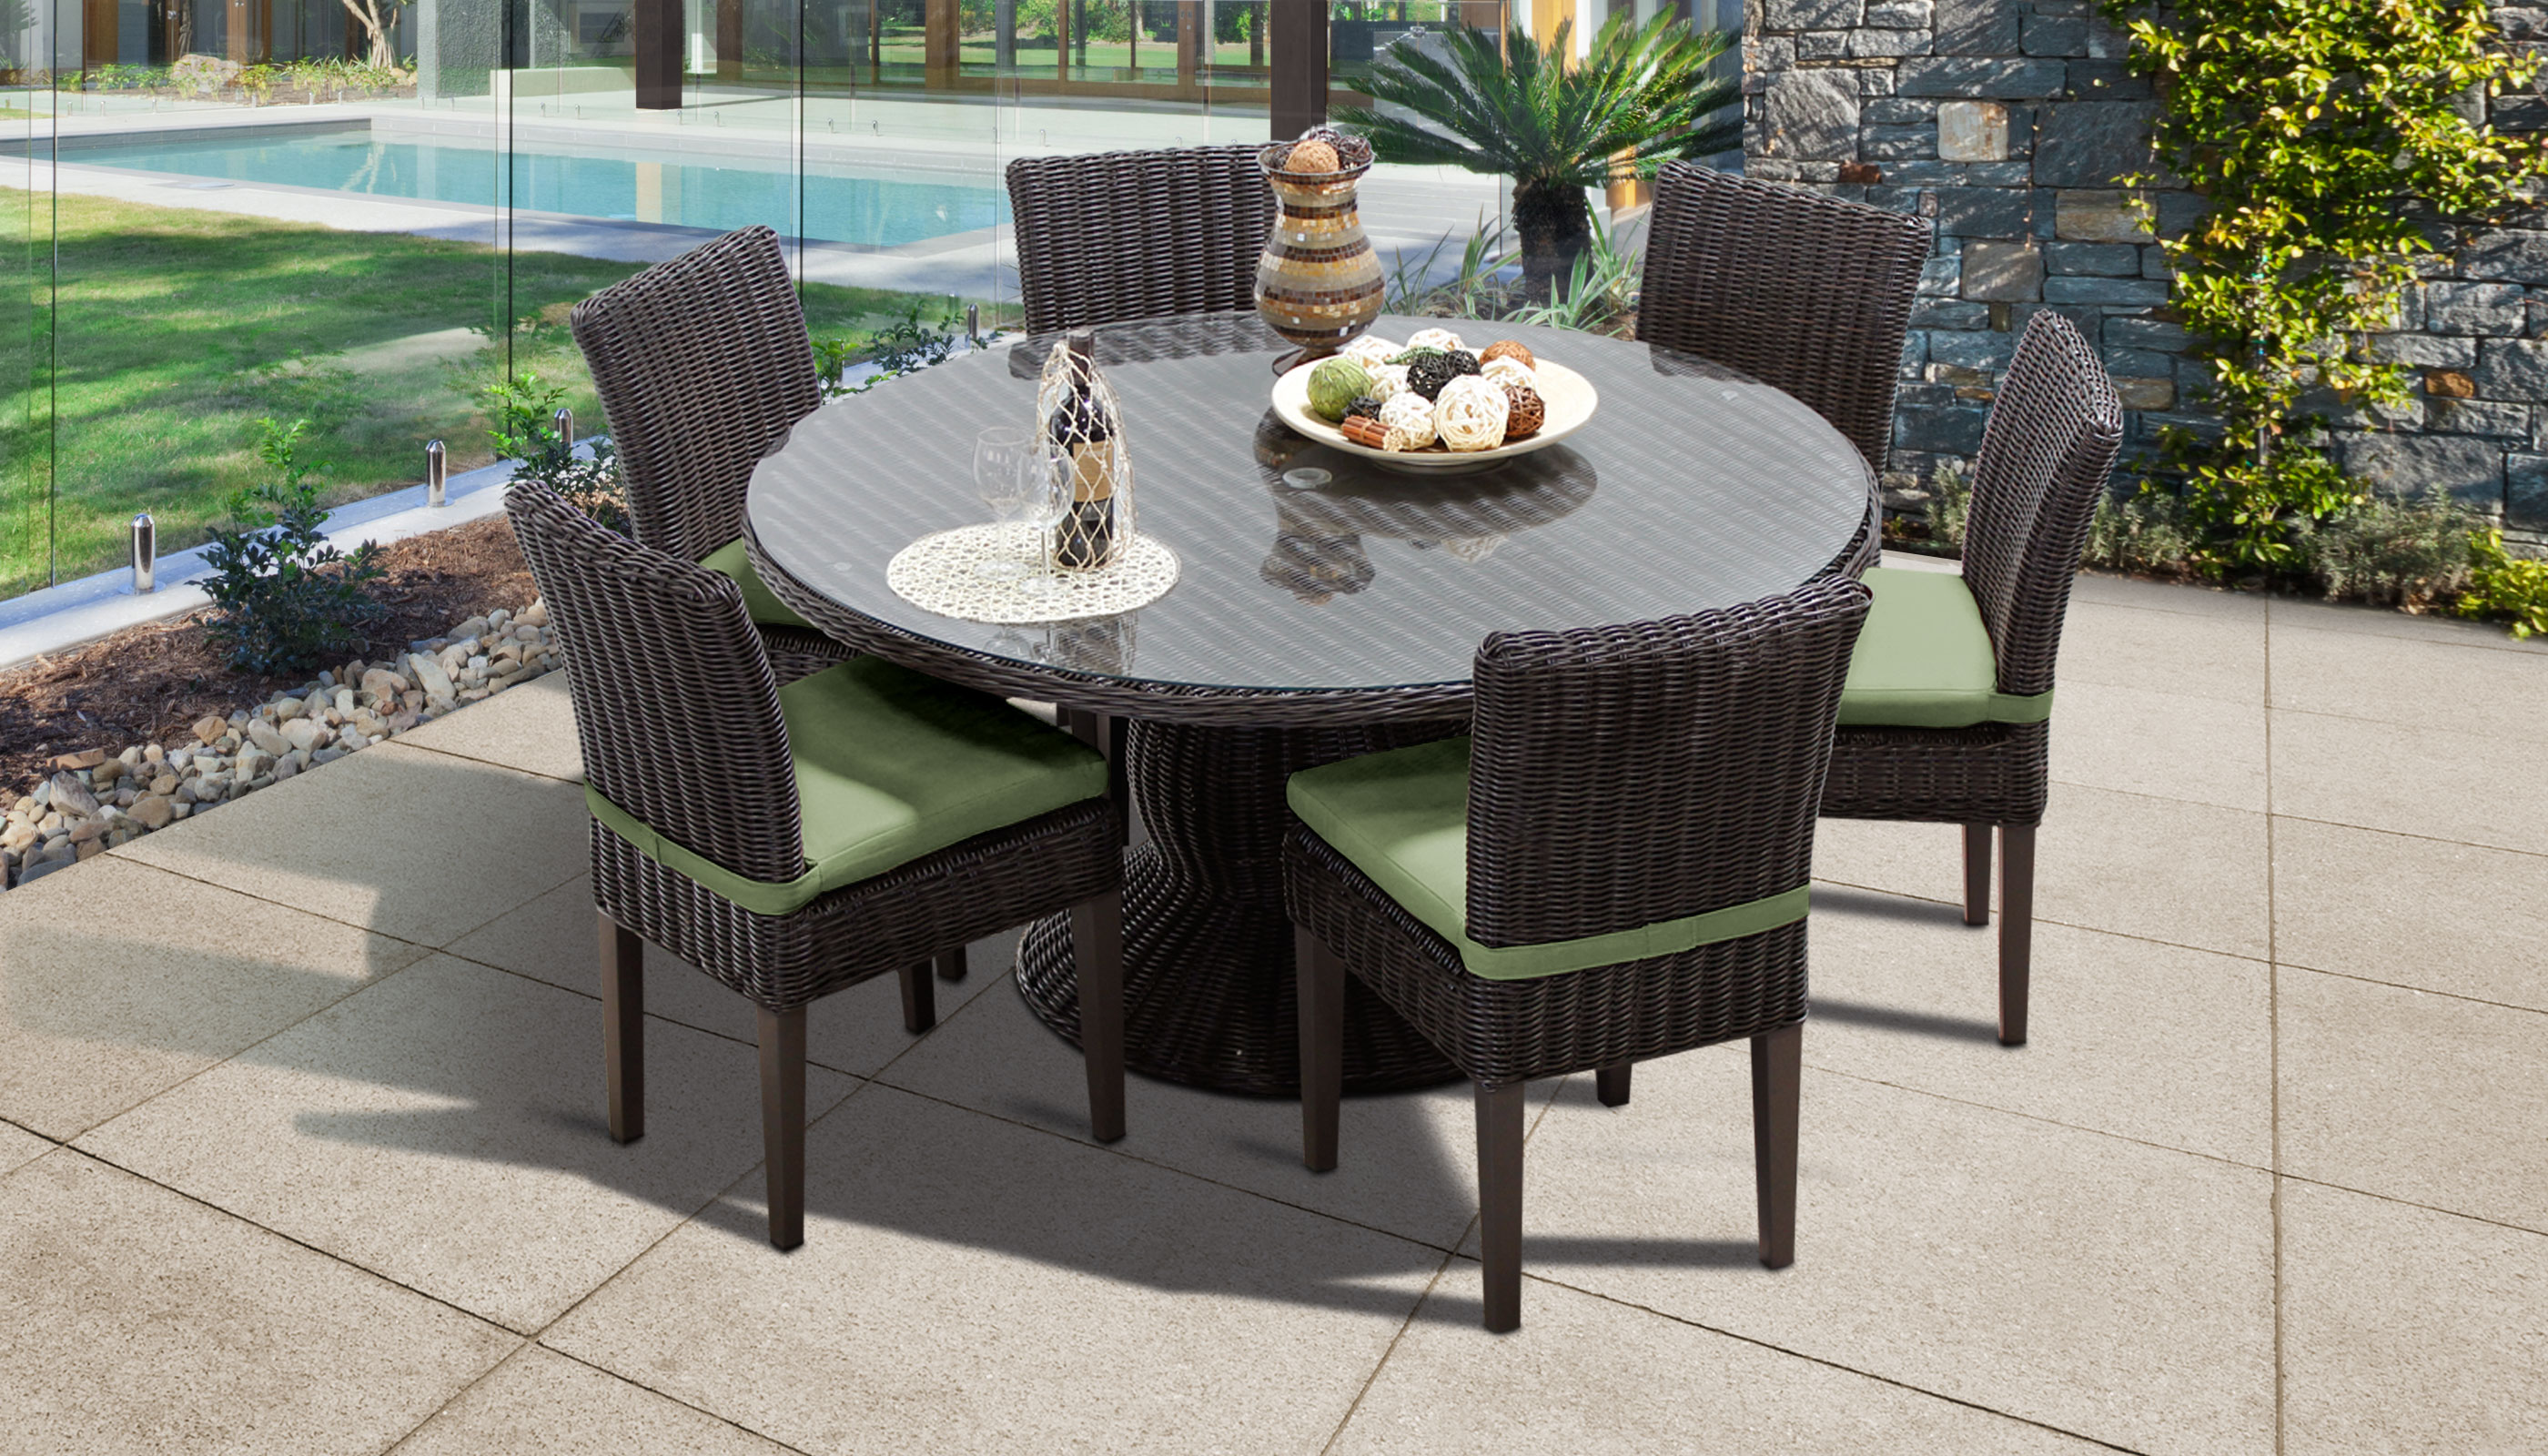 Venice 60 Inch Outdoor Patio Dining Table with 6 Armless Chairs